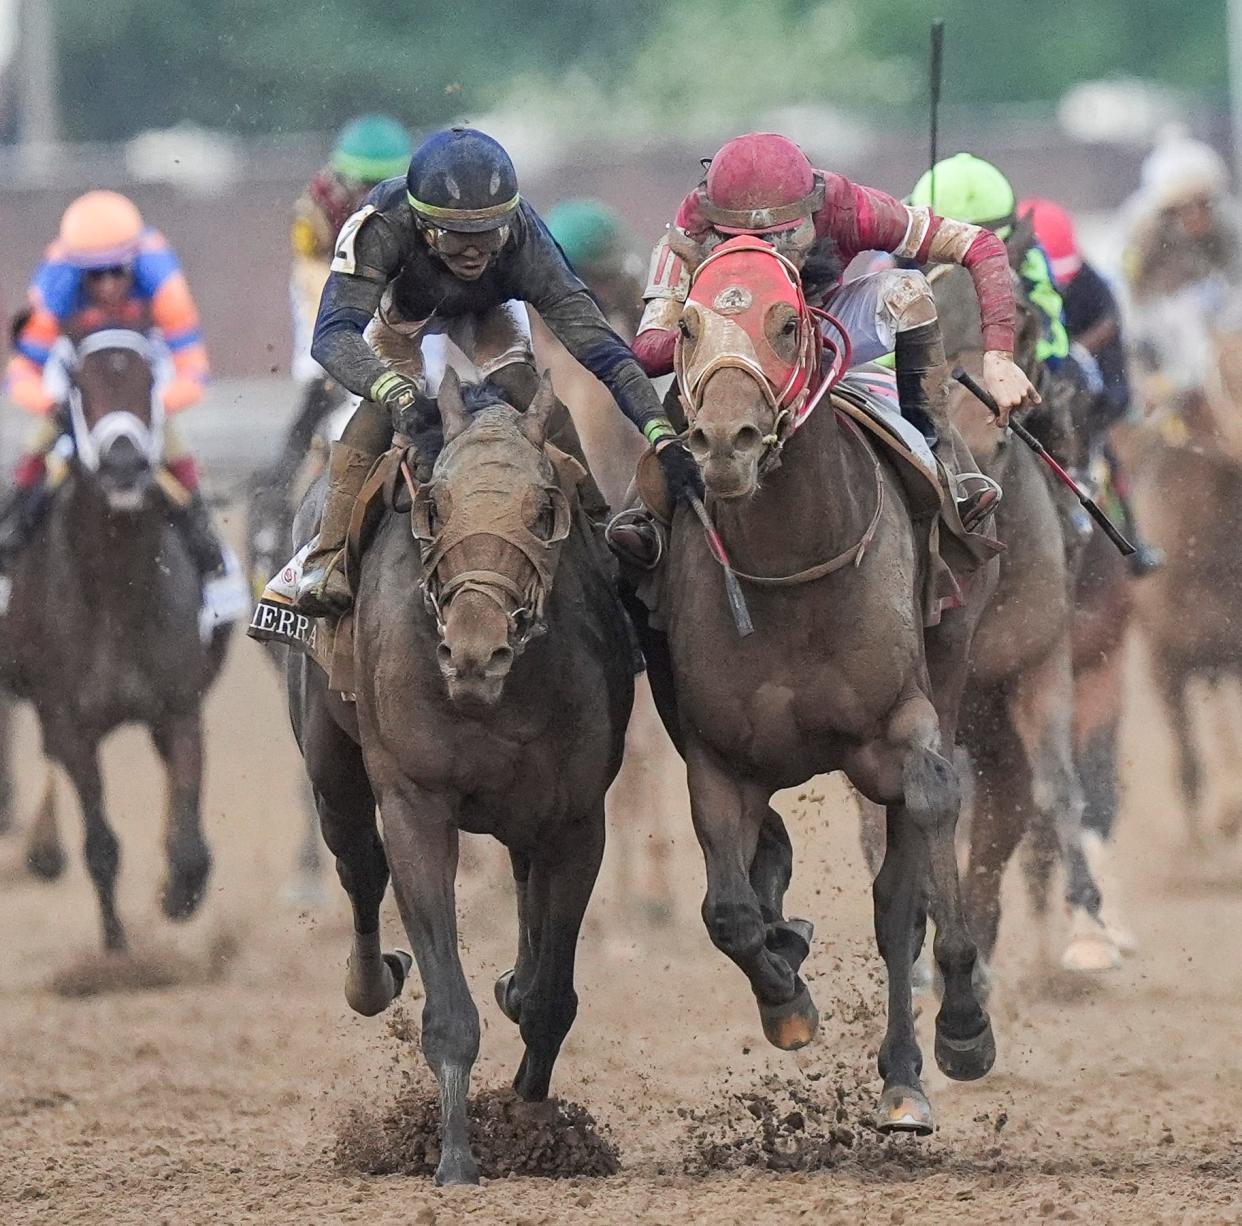 Sierra Leone, left, battled Forever Young down the stretch Saturday, bumping several times as the two tried to catch Mystik Dan.